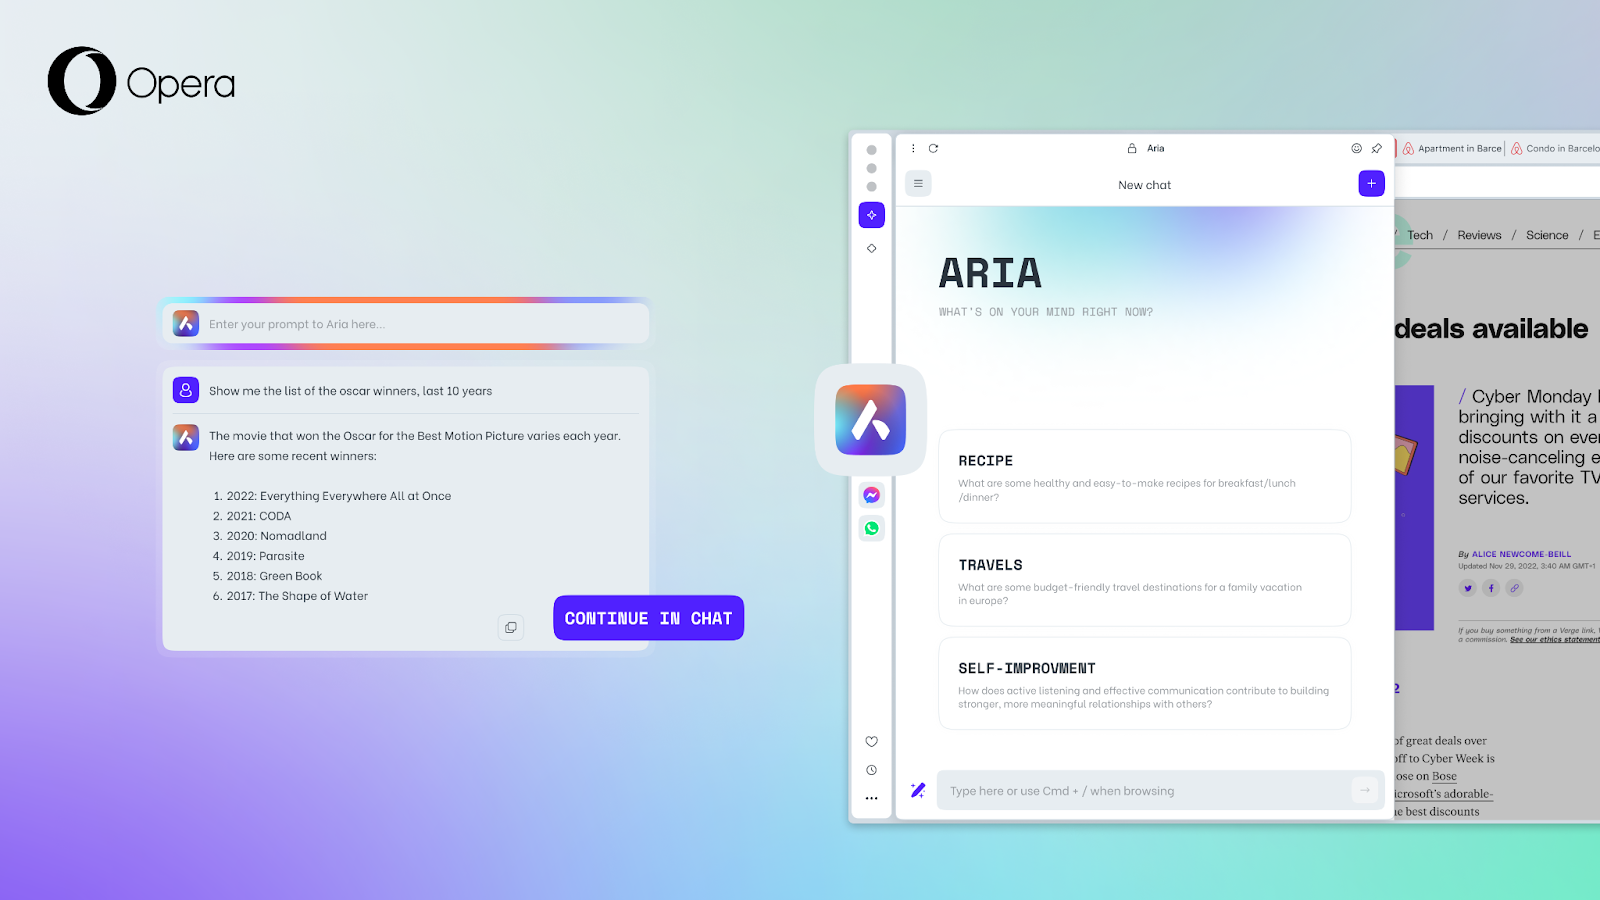 Aria's command Line update makes it possible to stay in the command line. Aria now answers to your queries in the command line itself. You can also click the "continue in chat" button to go to a normal chat with Aria.